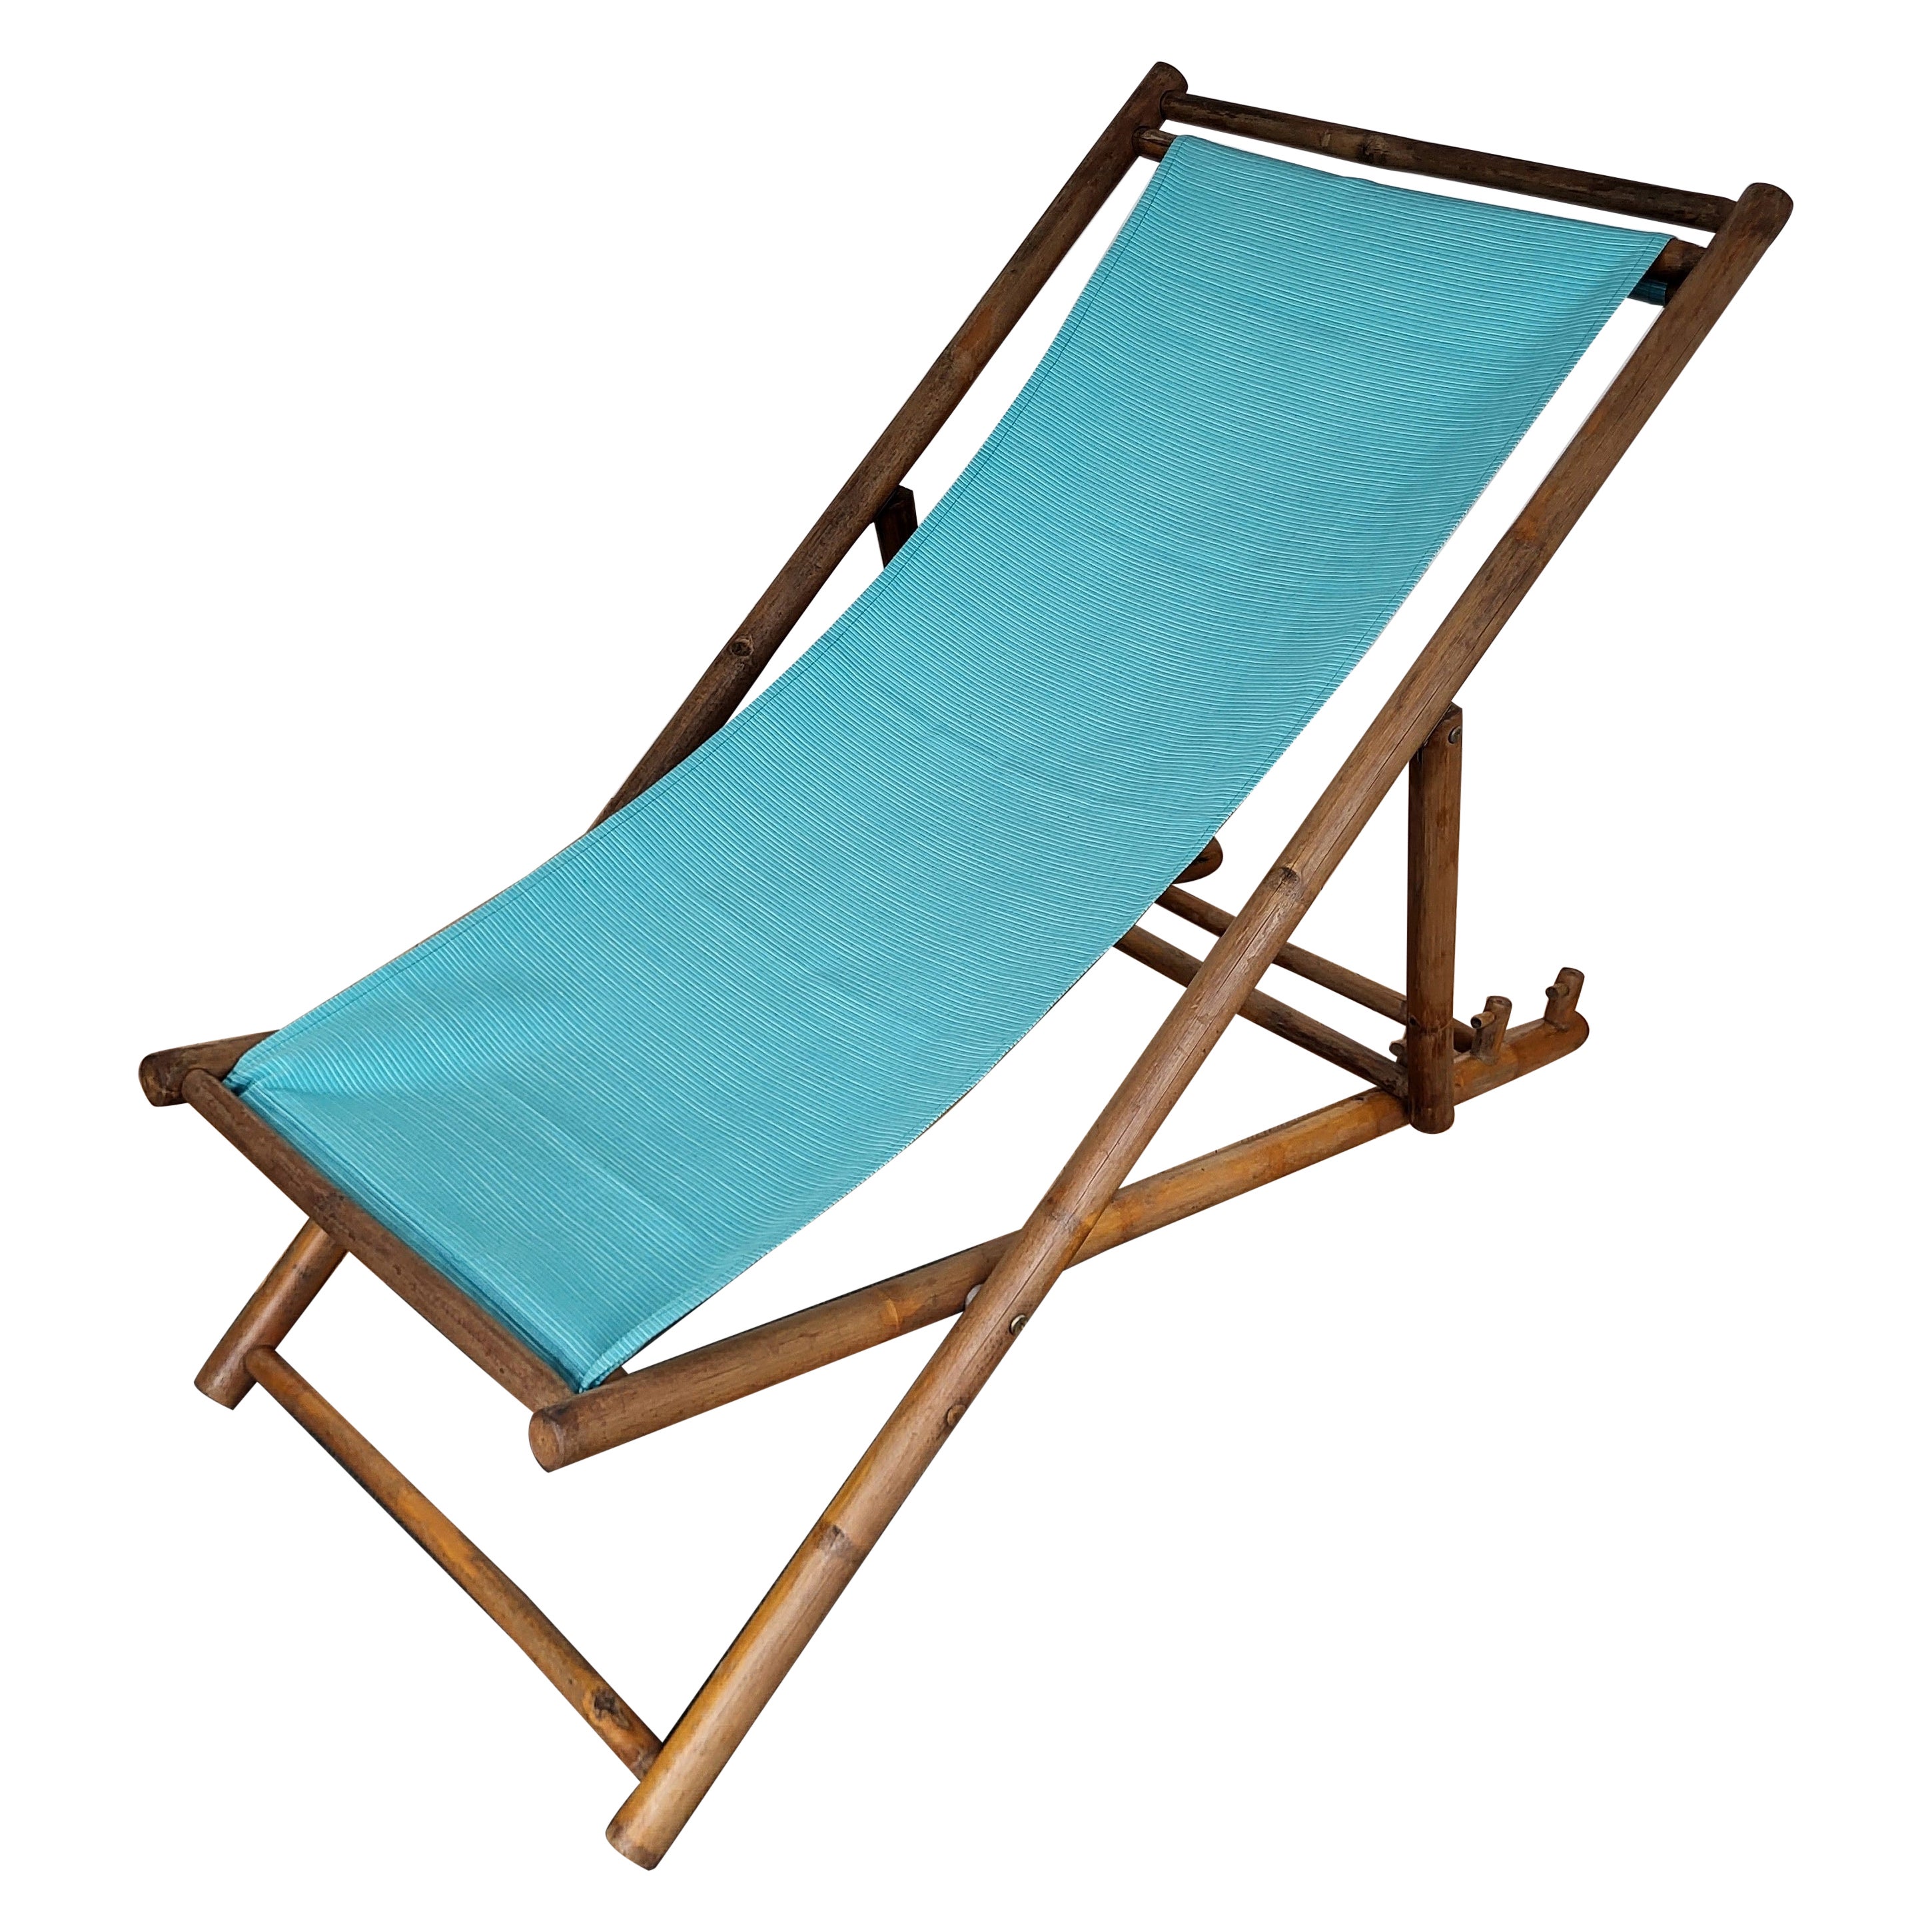 Transat Folding Deck Chair Patio Lounger, Chaise Longue, Bambo Wood and Fabric